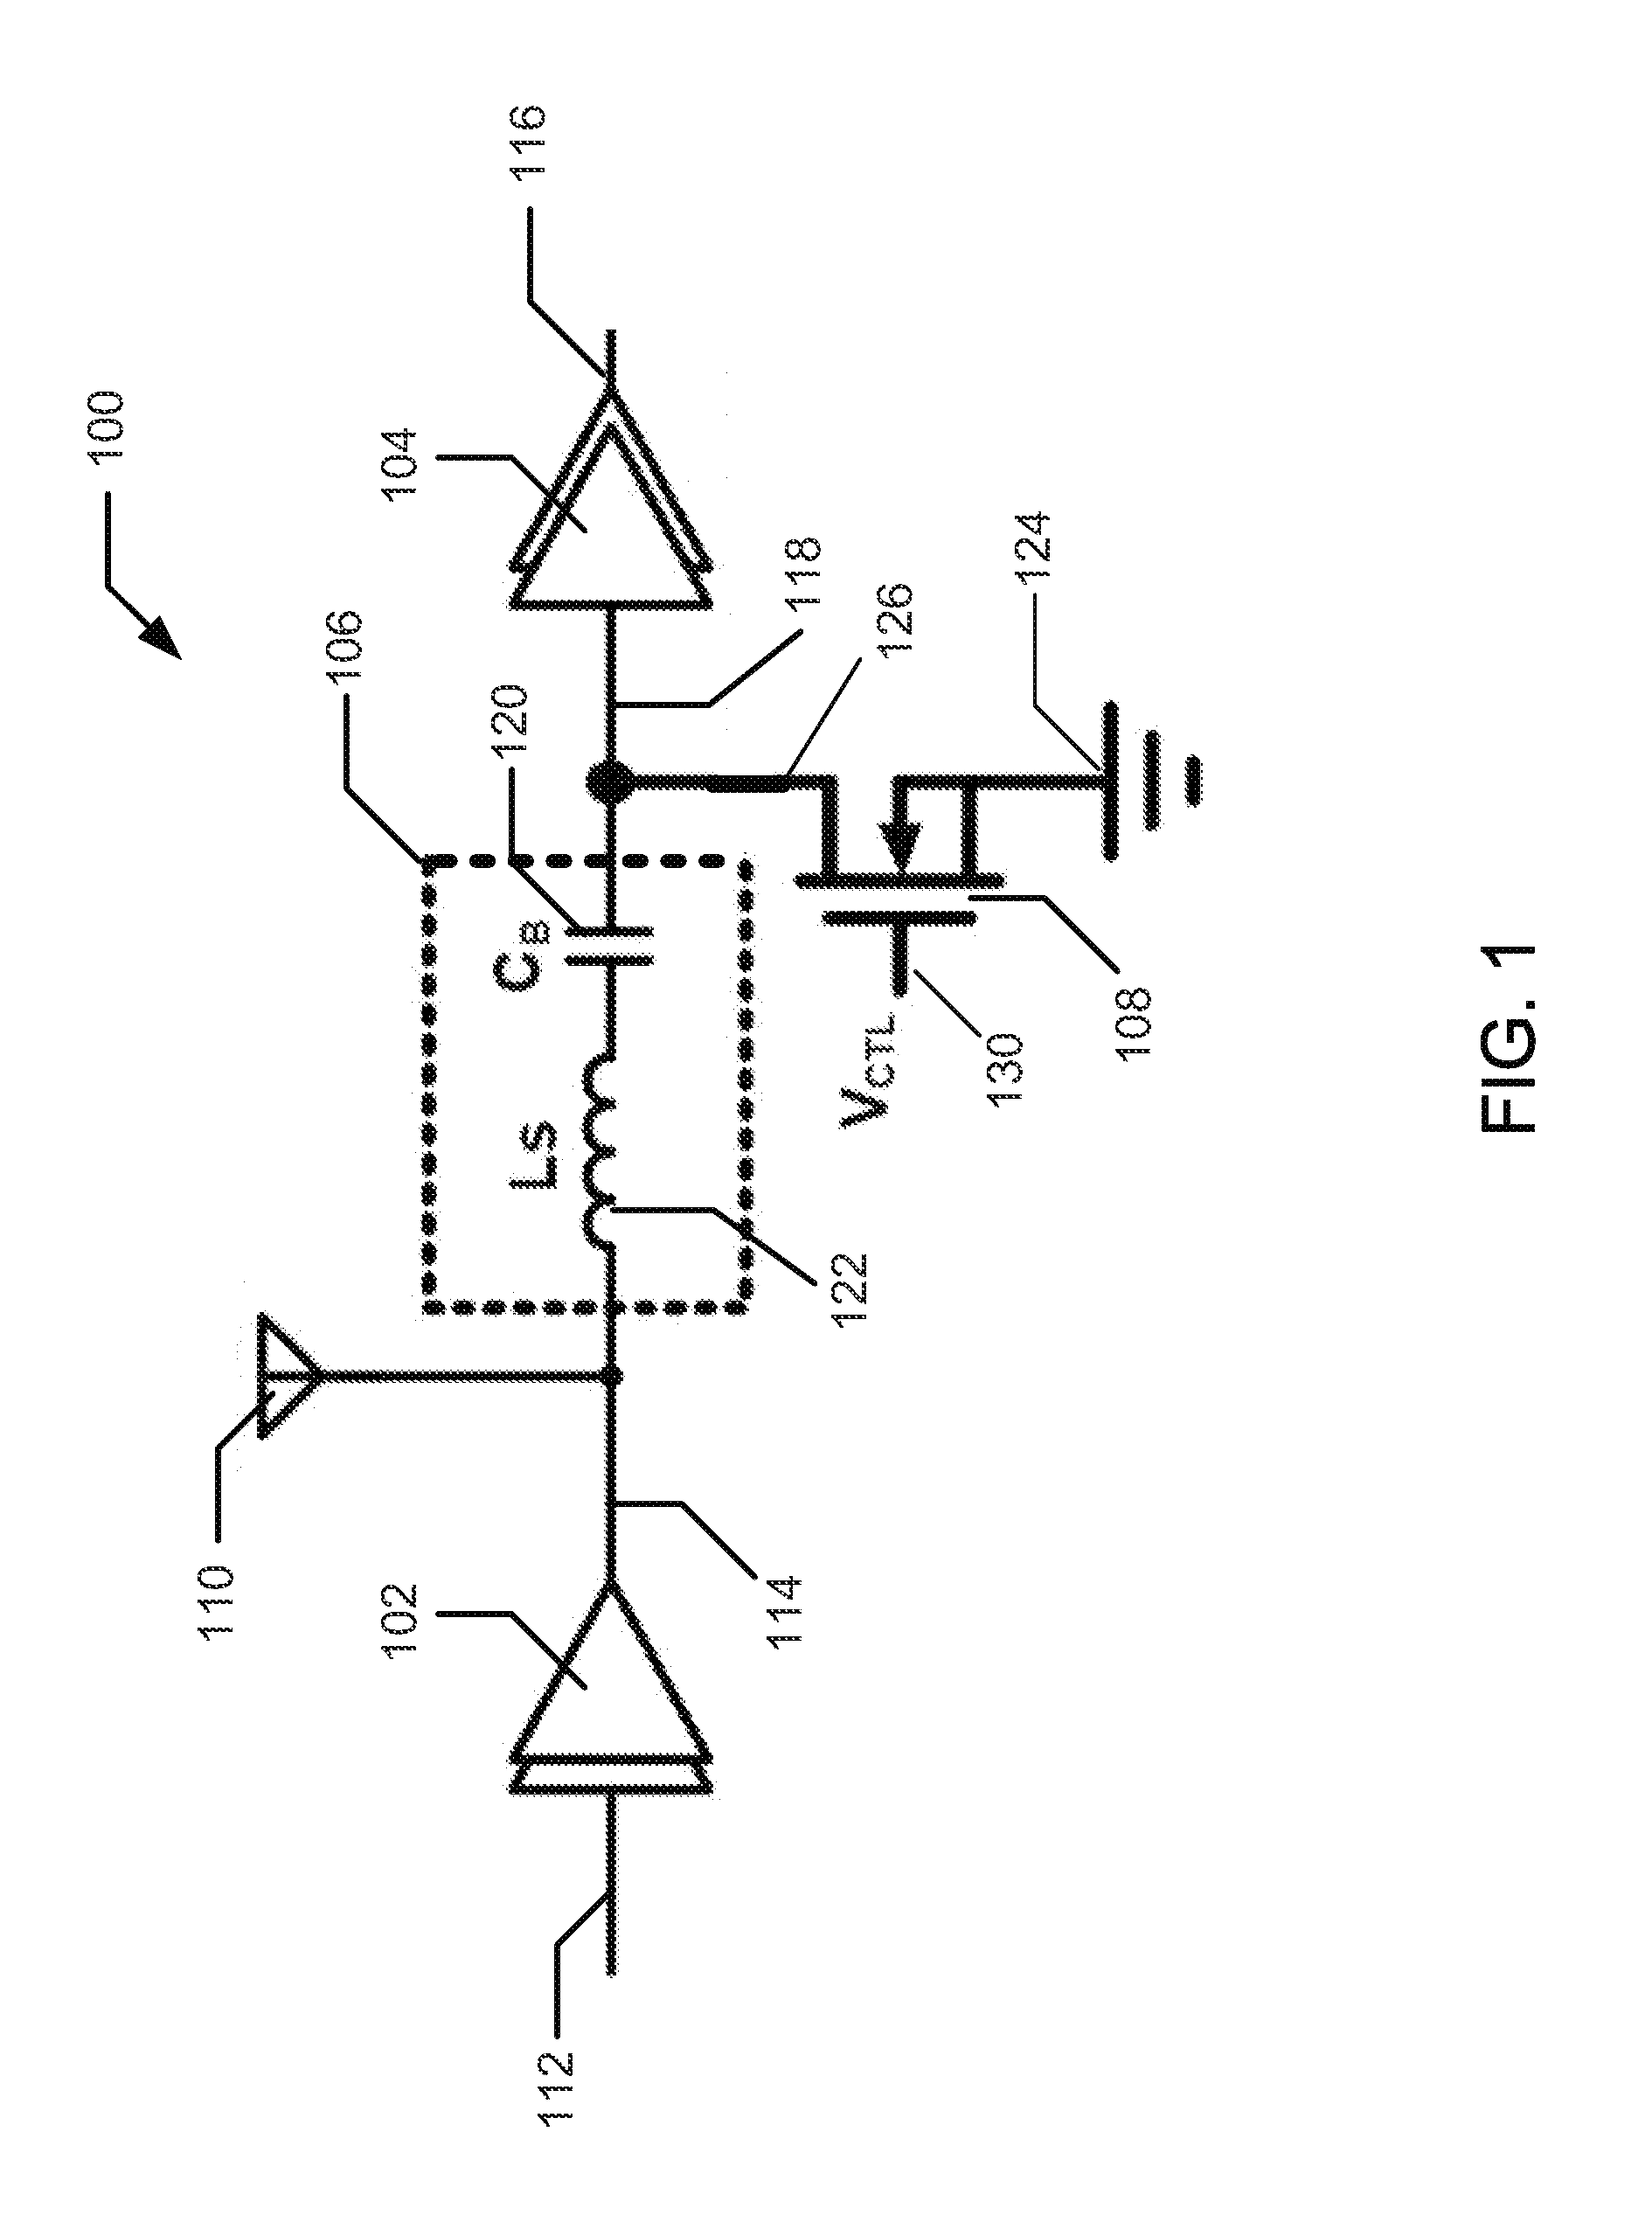 Transceiver with an integrated rx/tx configurable passive network